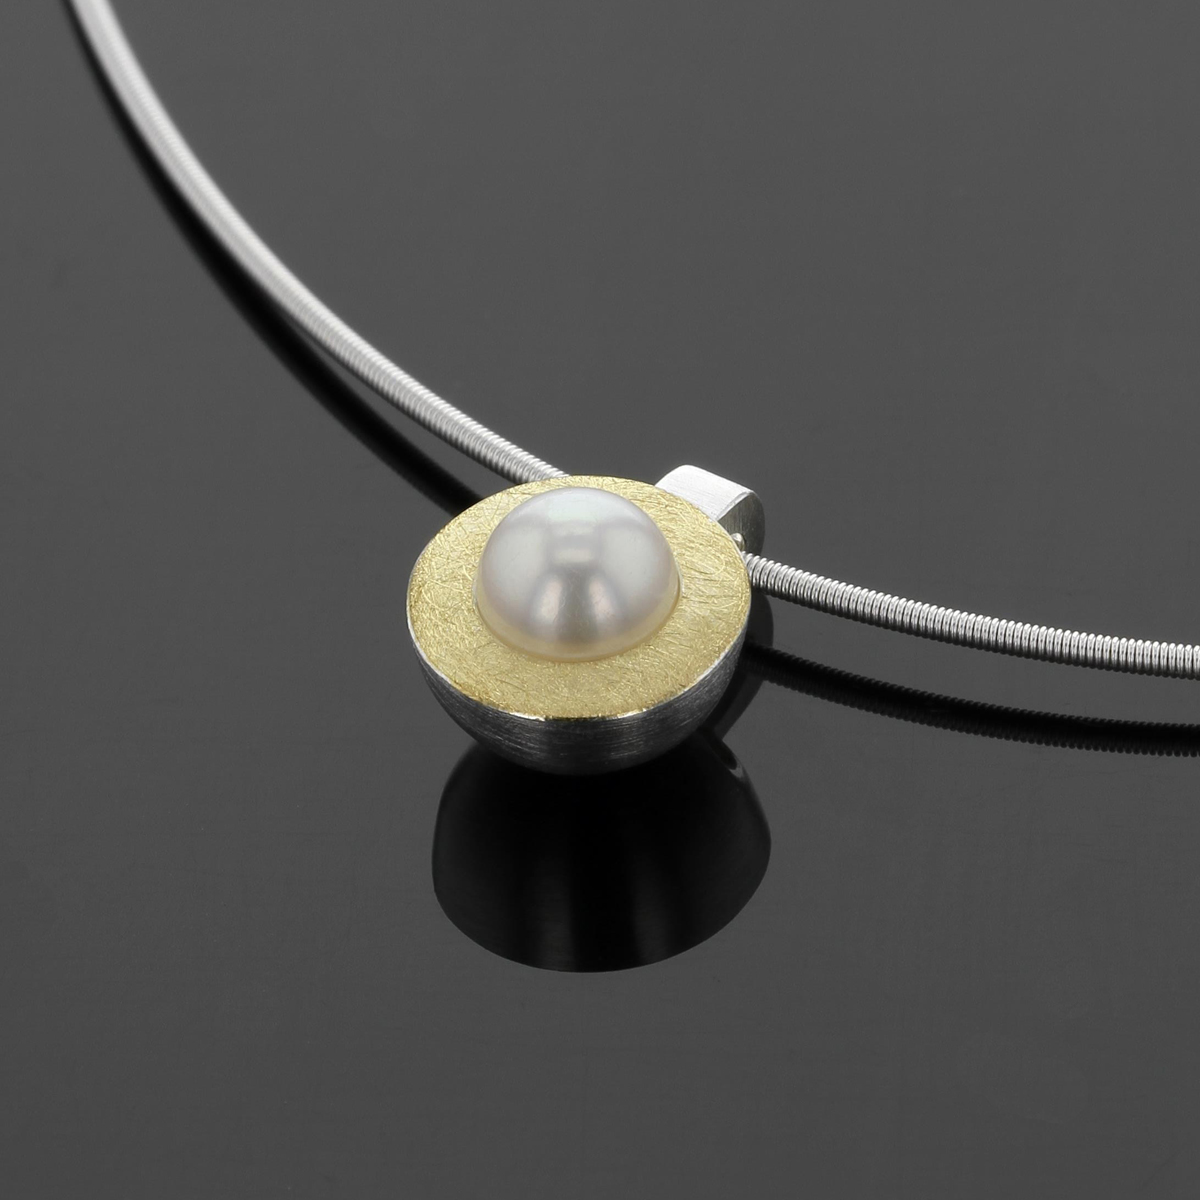 Round pendant in silver with a layer of yellow gold on its top surface with a freshwater pearl at its center